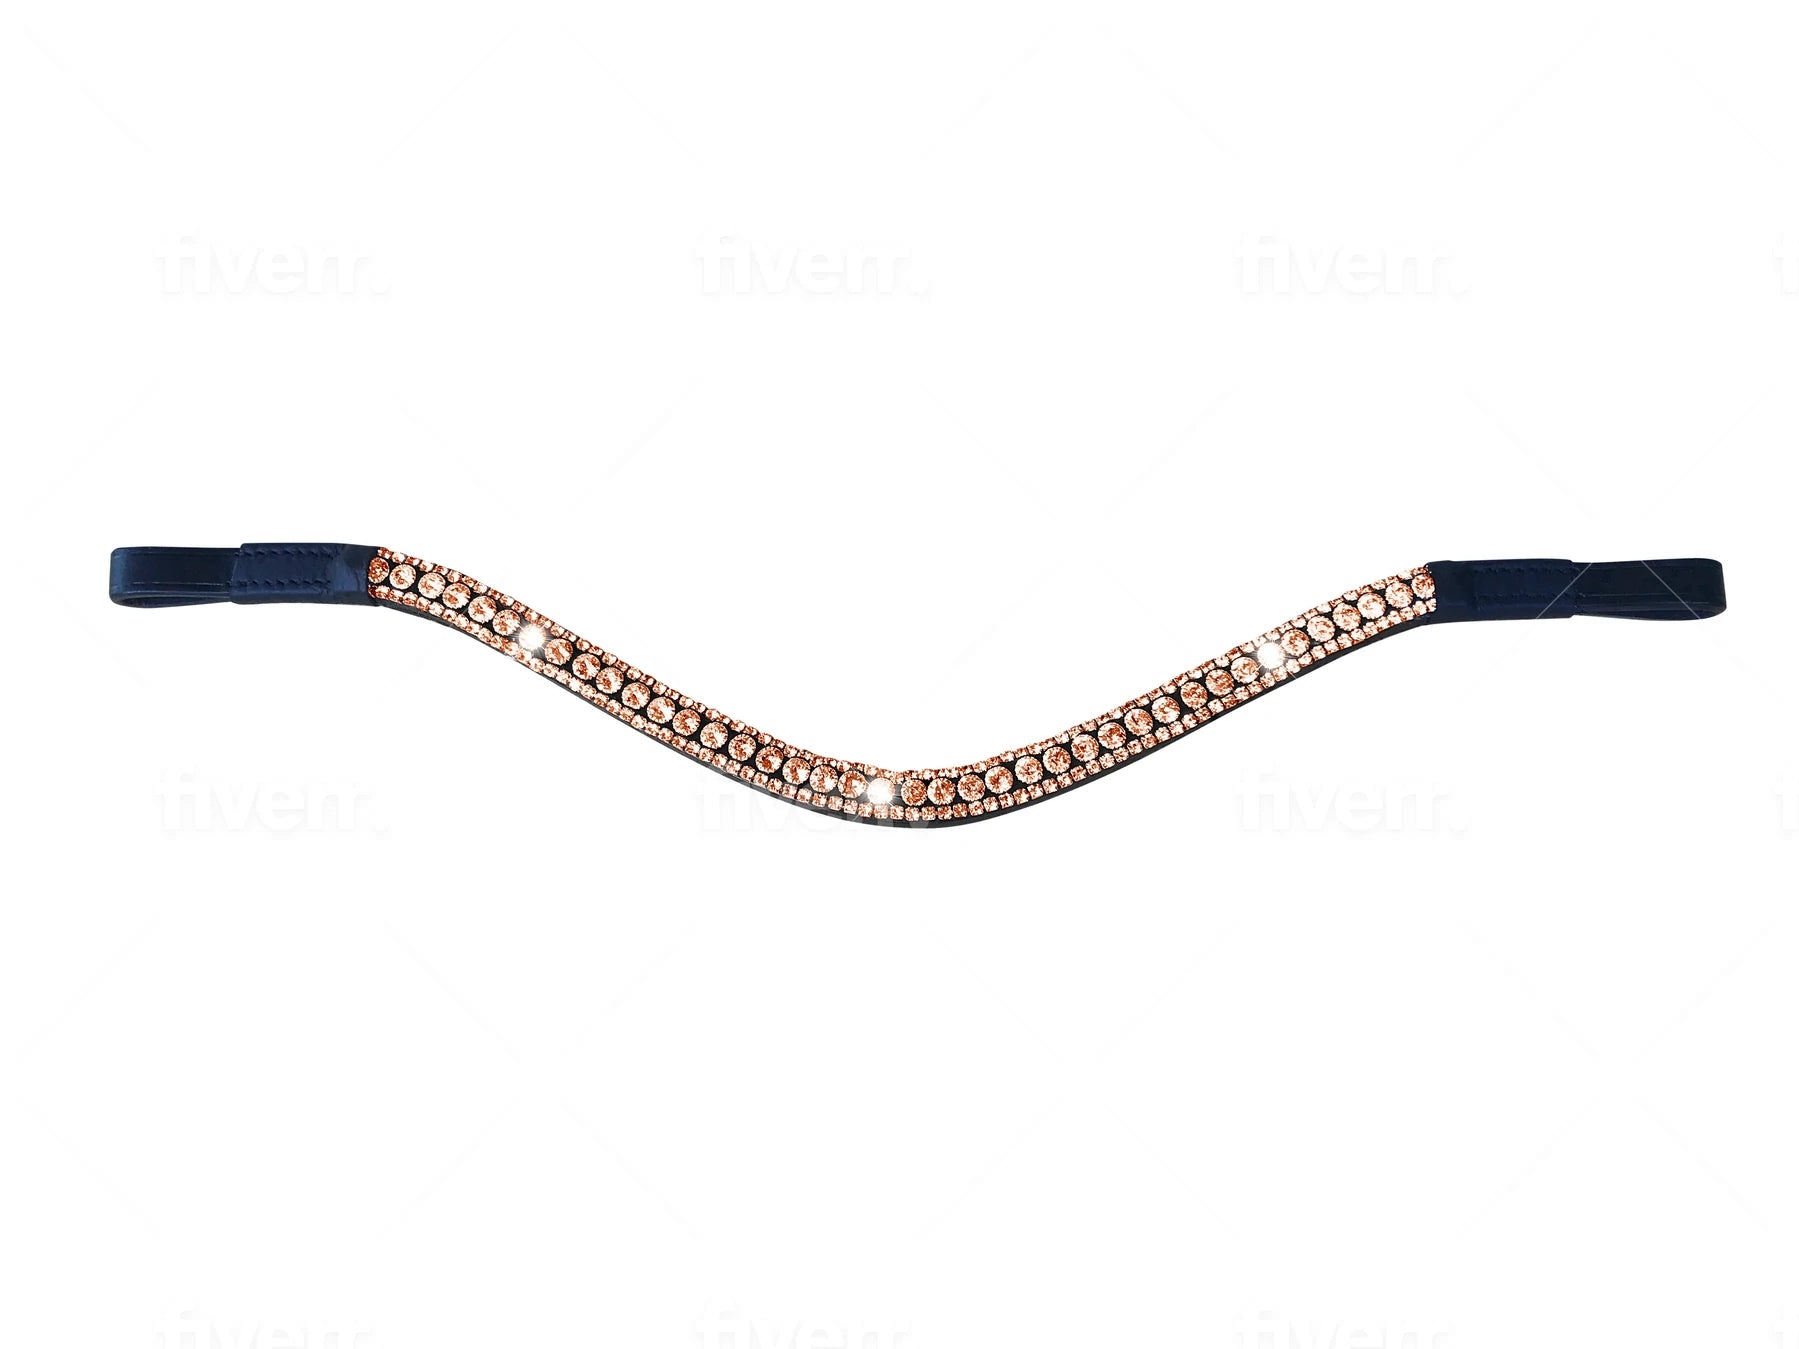 Lumiere Equestrian Rose Gold Crystal Browband, Black Leather